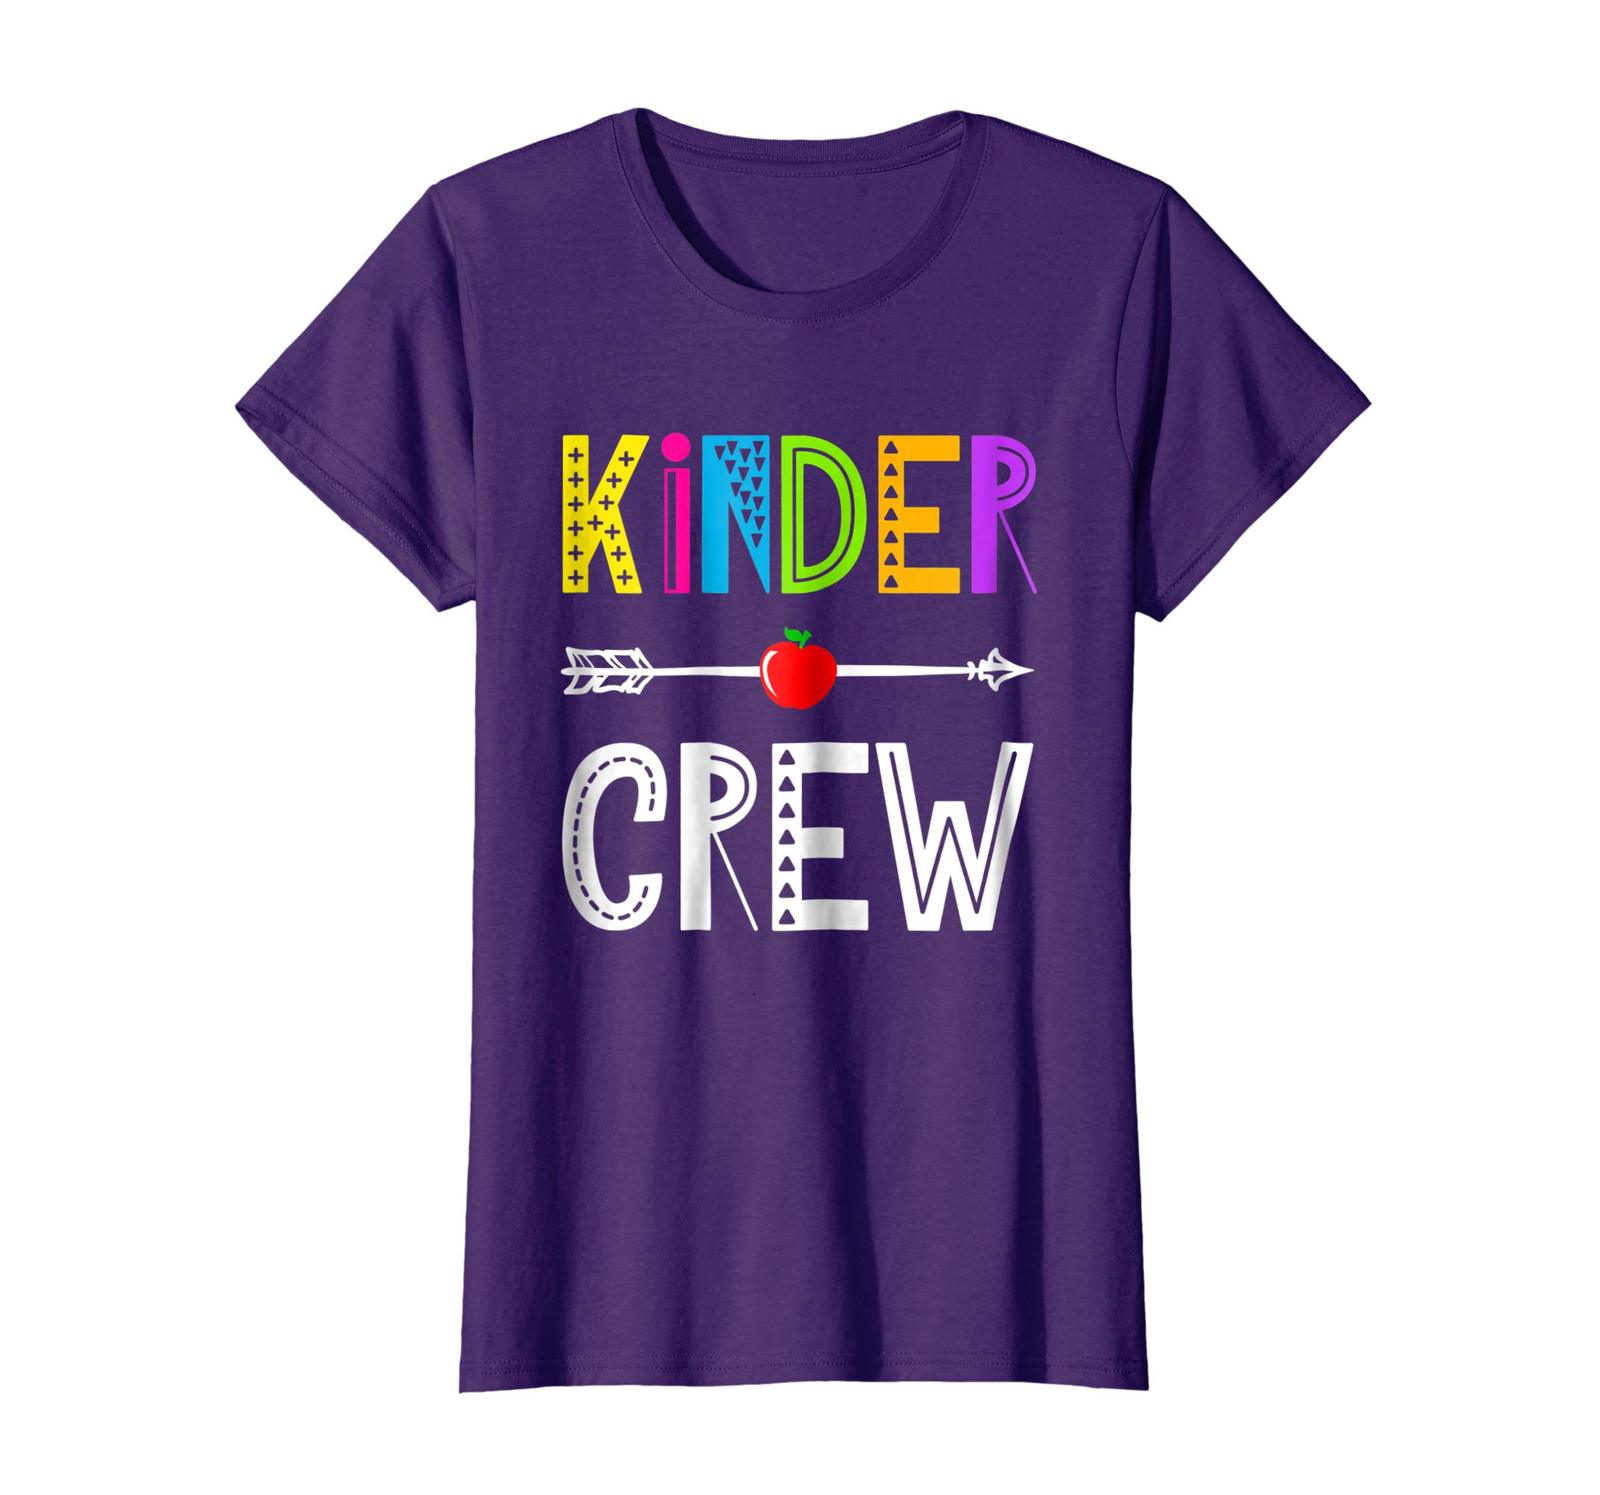 New Style - Kinder Crew Shirt Back to School Gift Wowen - Tops